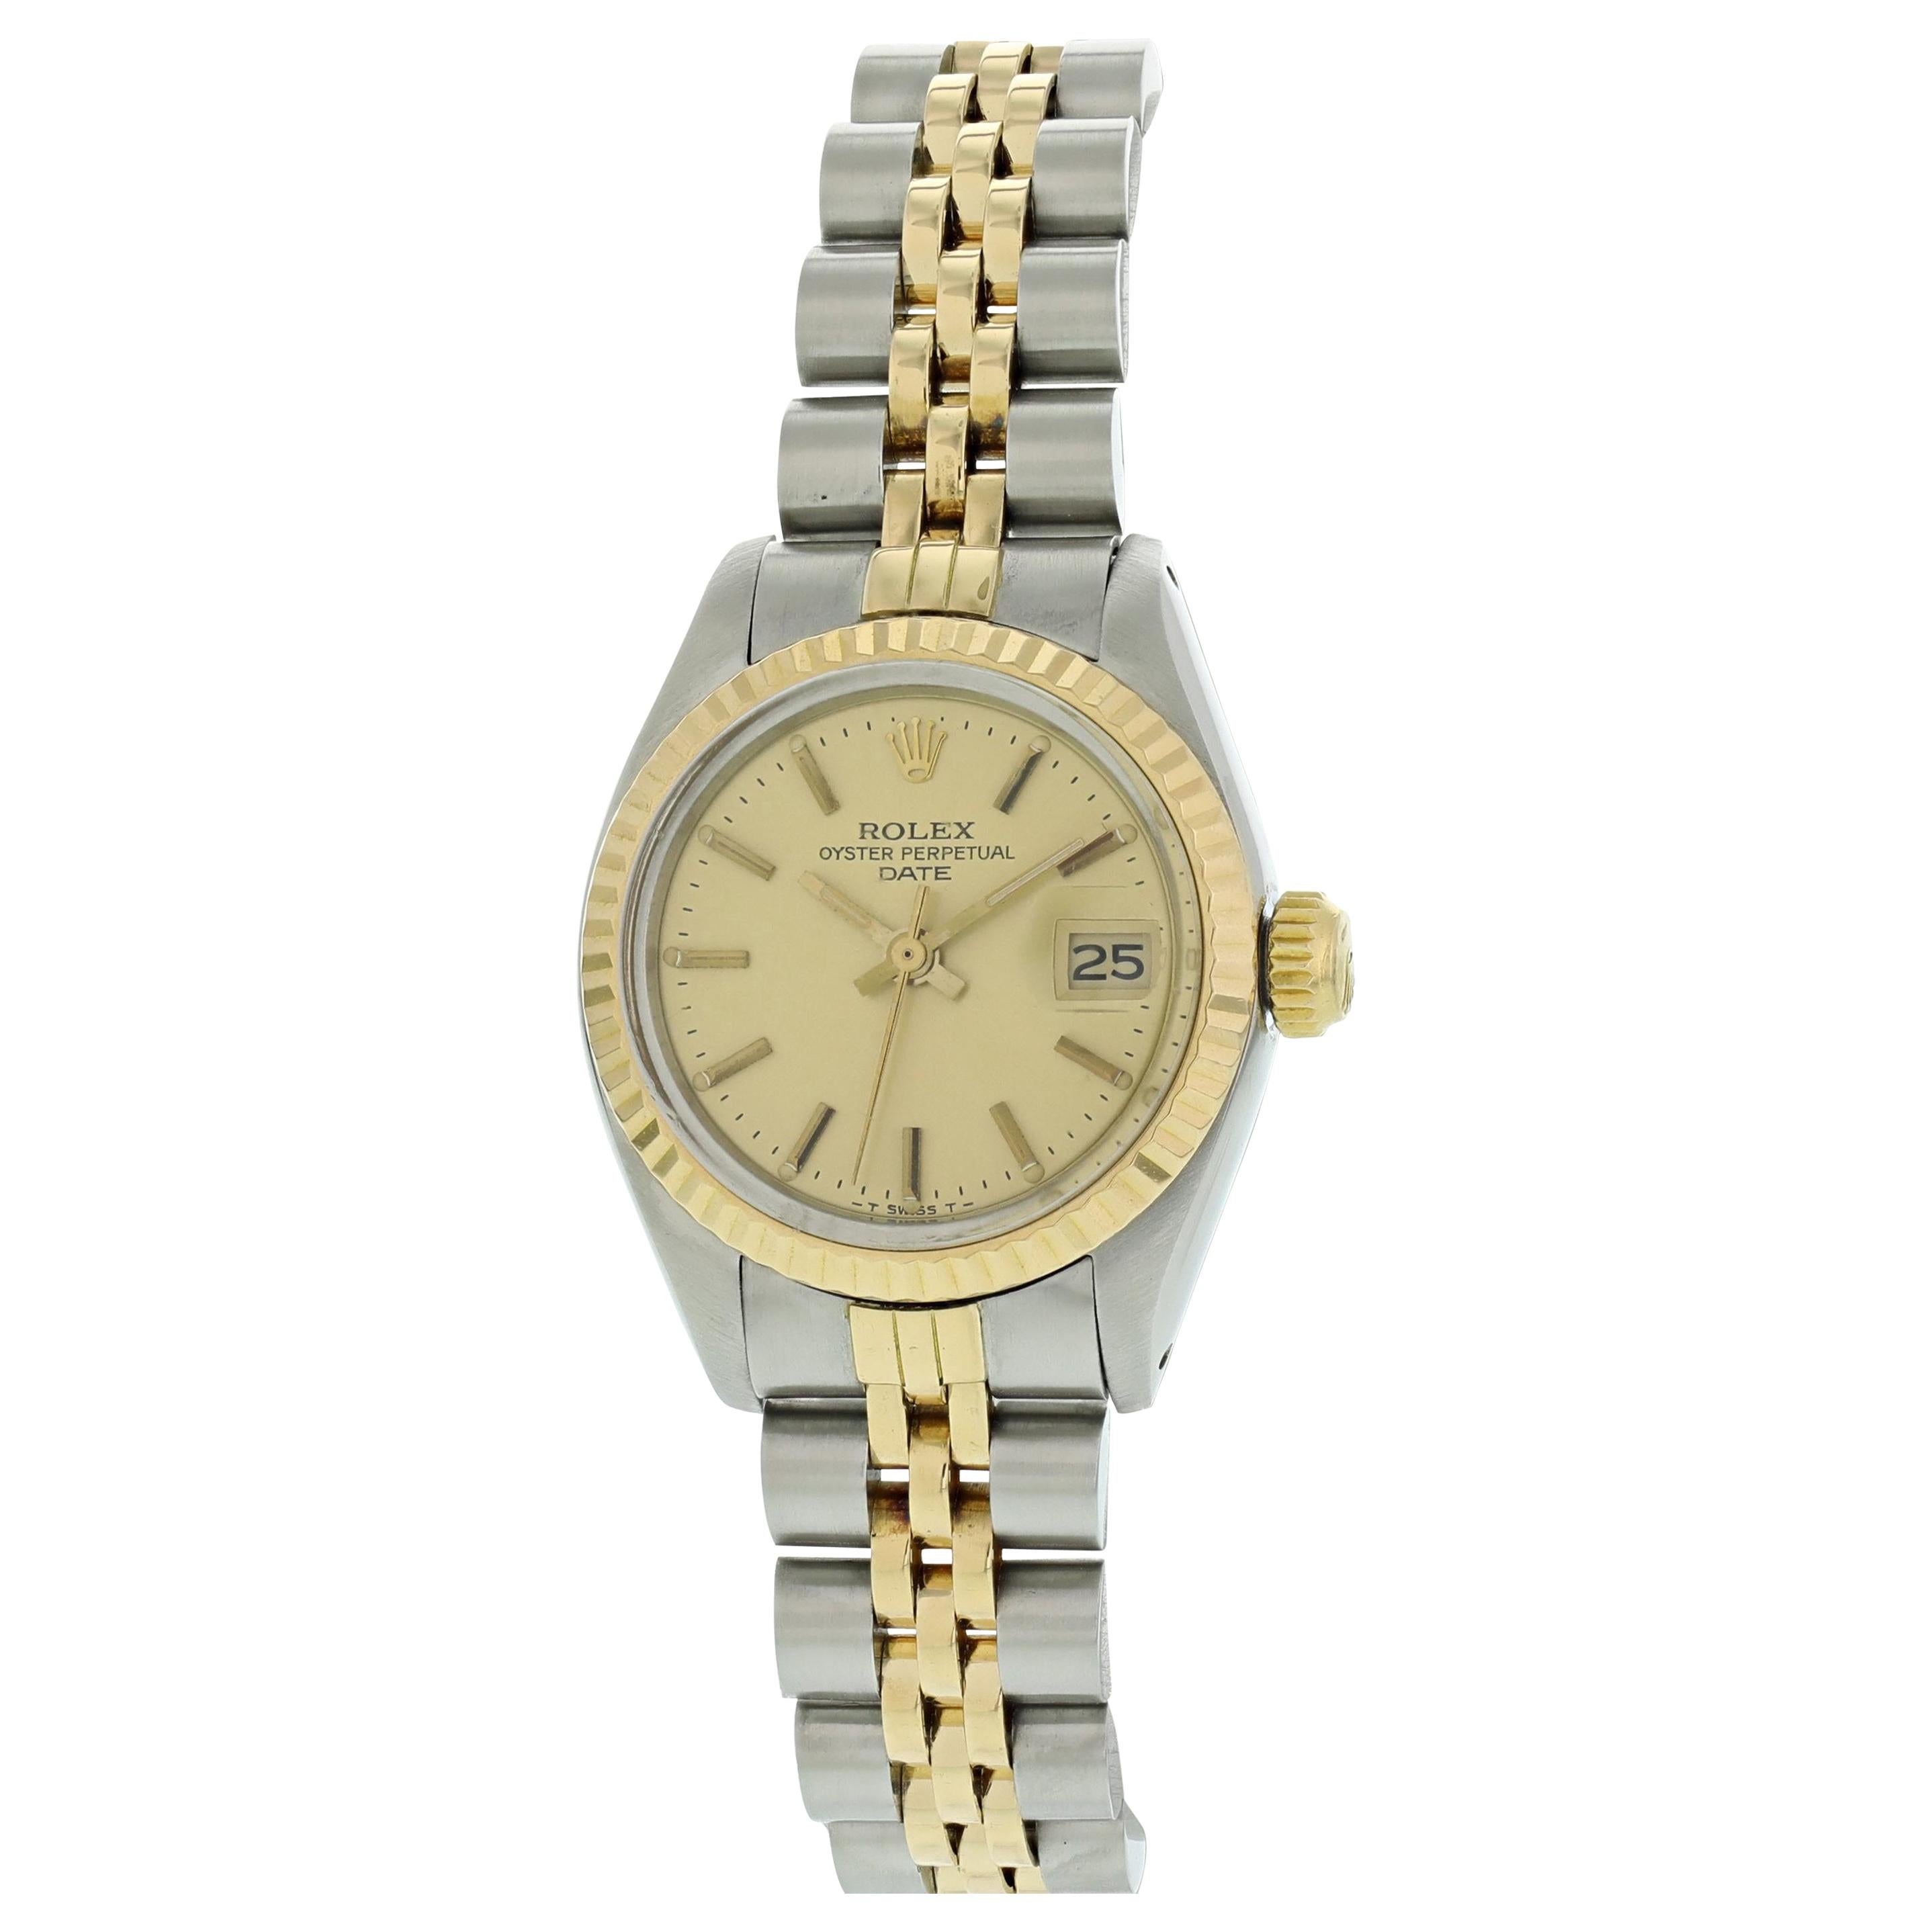 Rolex Oyster Perpetual Date 6917 Ladies Watch For Sale